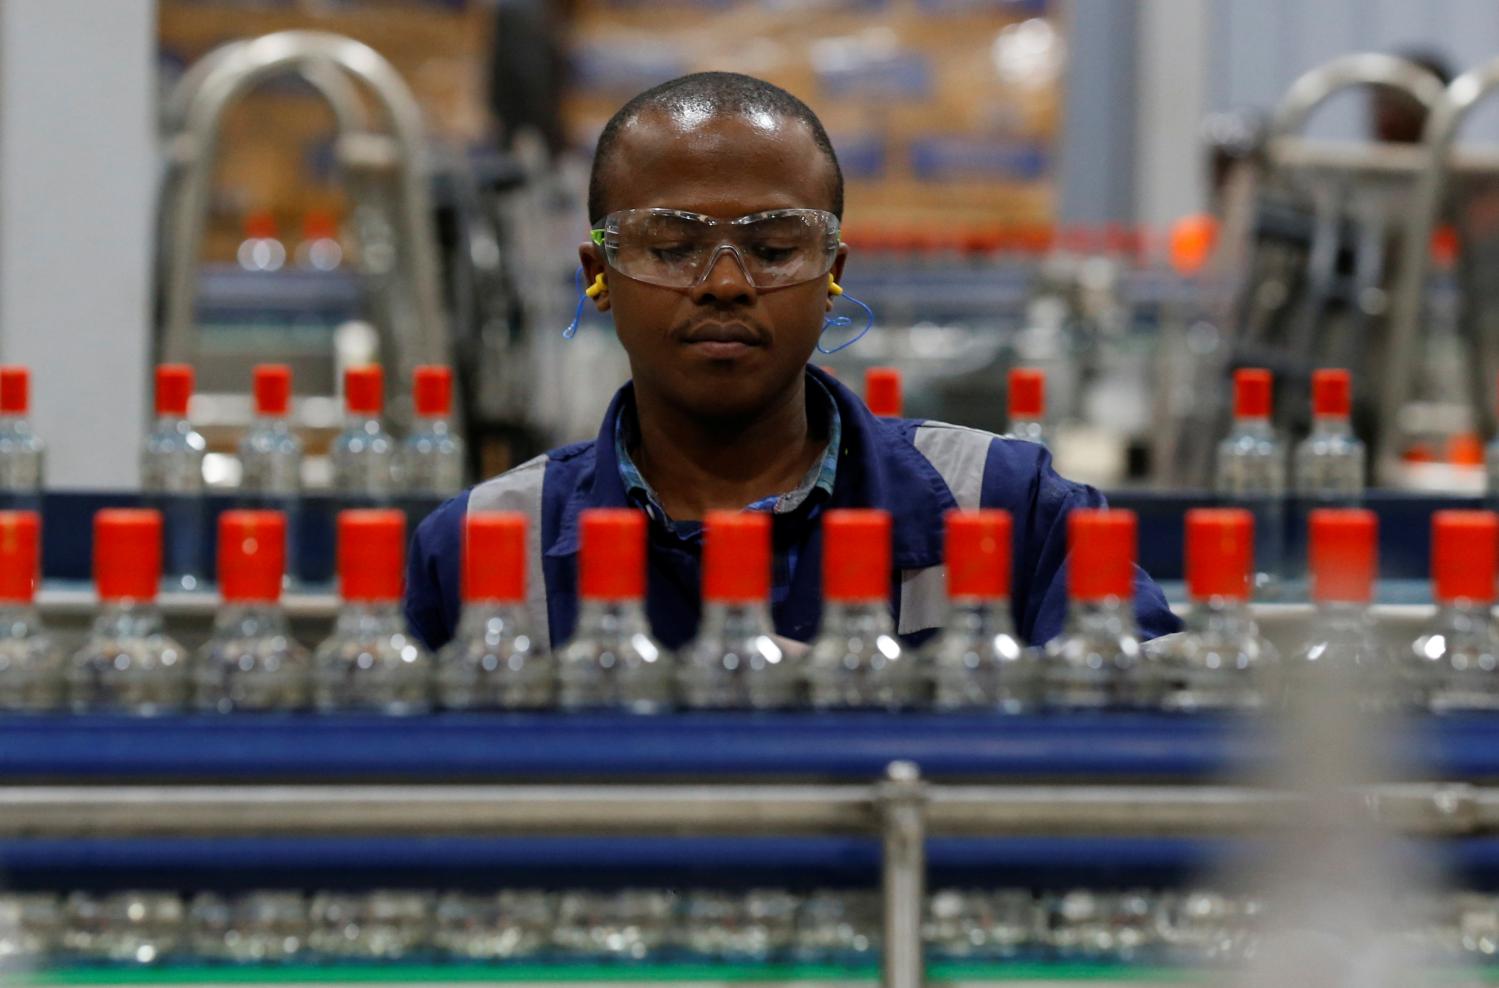 An employee inspects Kenya Cane spirit bottles on a conveyor belt at the East African Breweries Limited factory in Ruaraka factory in Nairobi, Kenya April 6, 2018. Picture taken April 6, 2018. REUTERS/Thomas Mukoya - RC18A50BF7B0